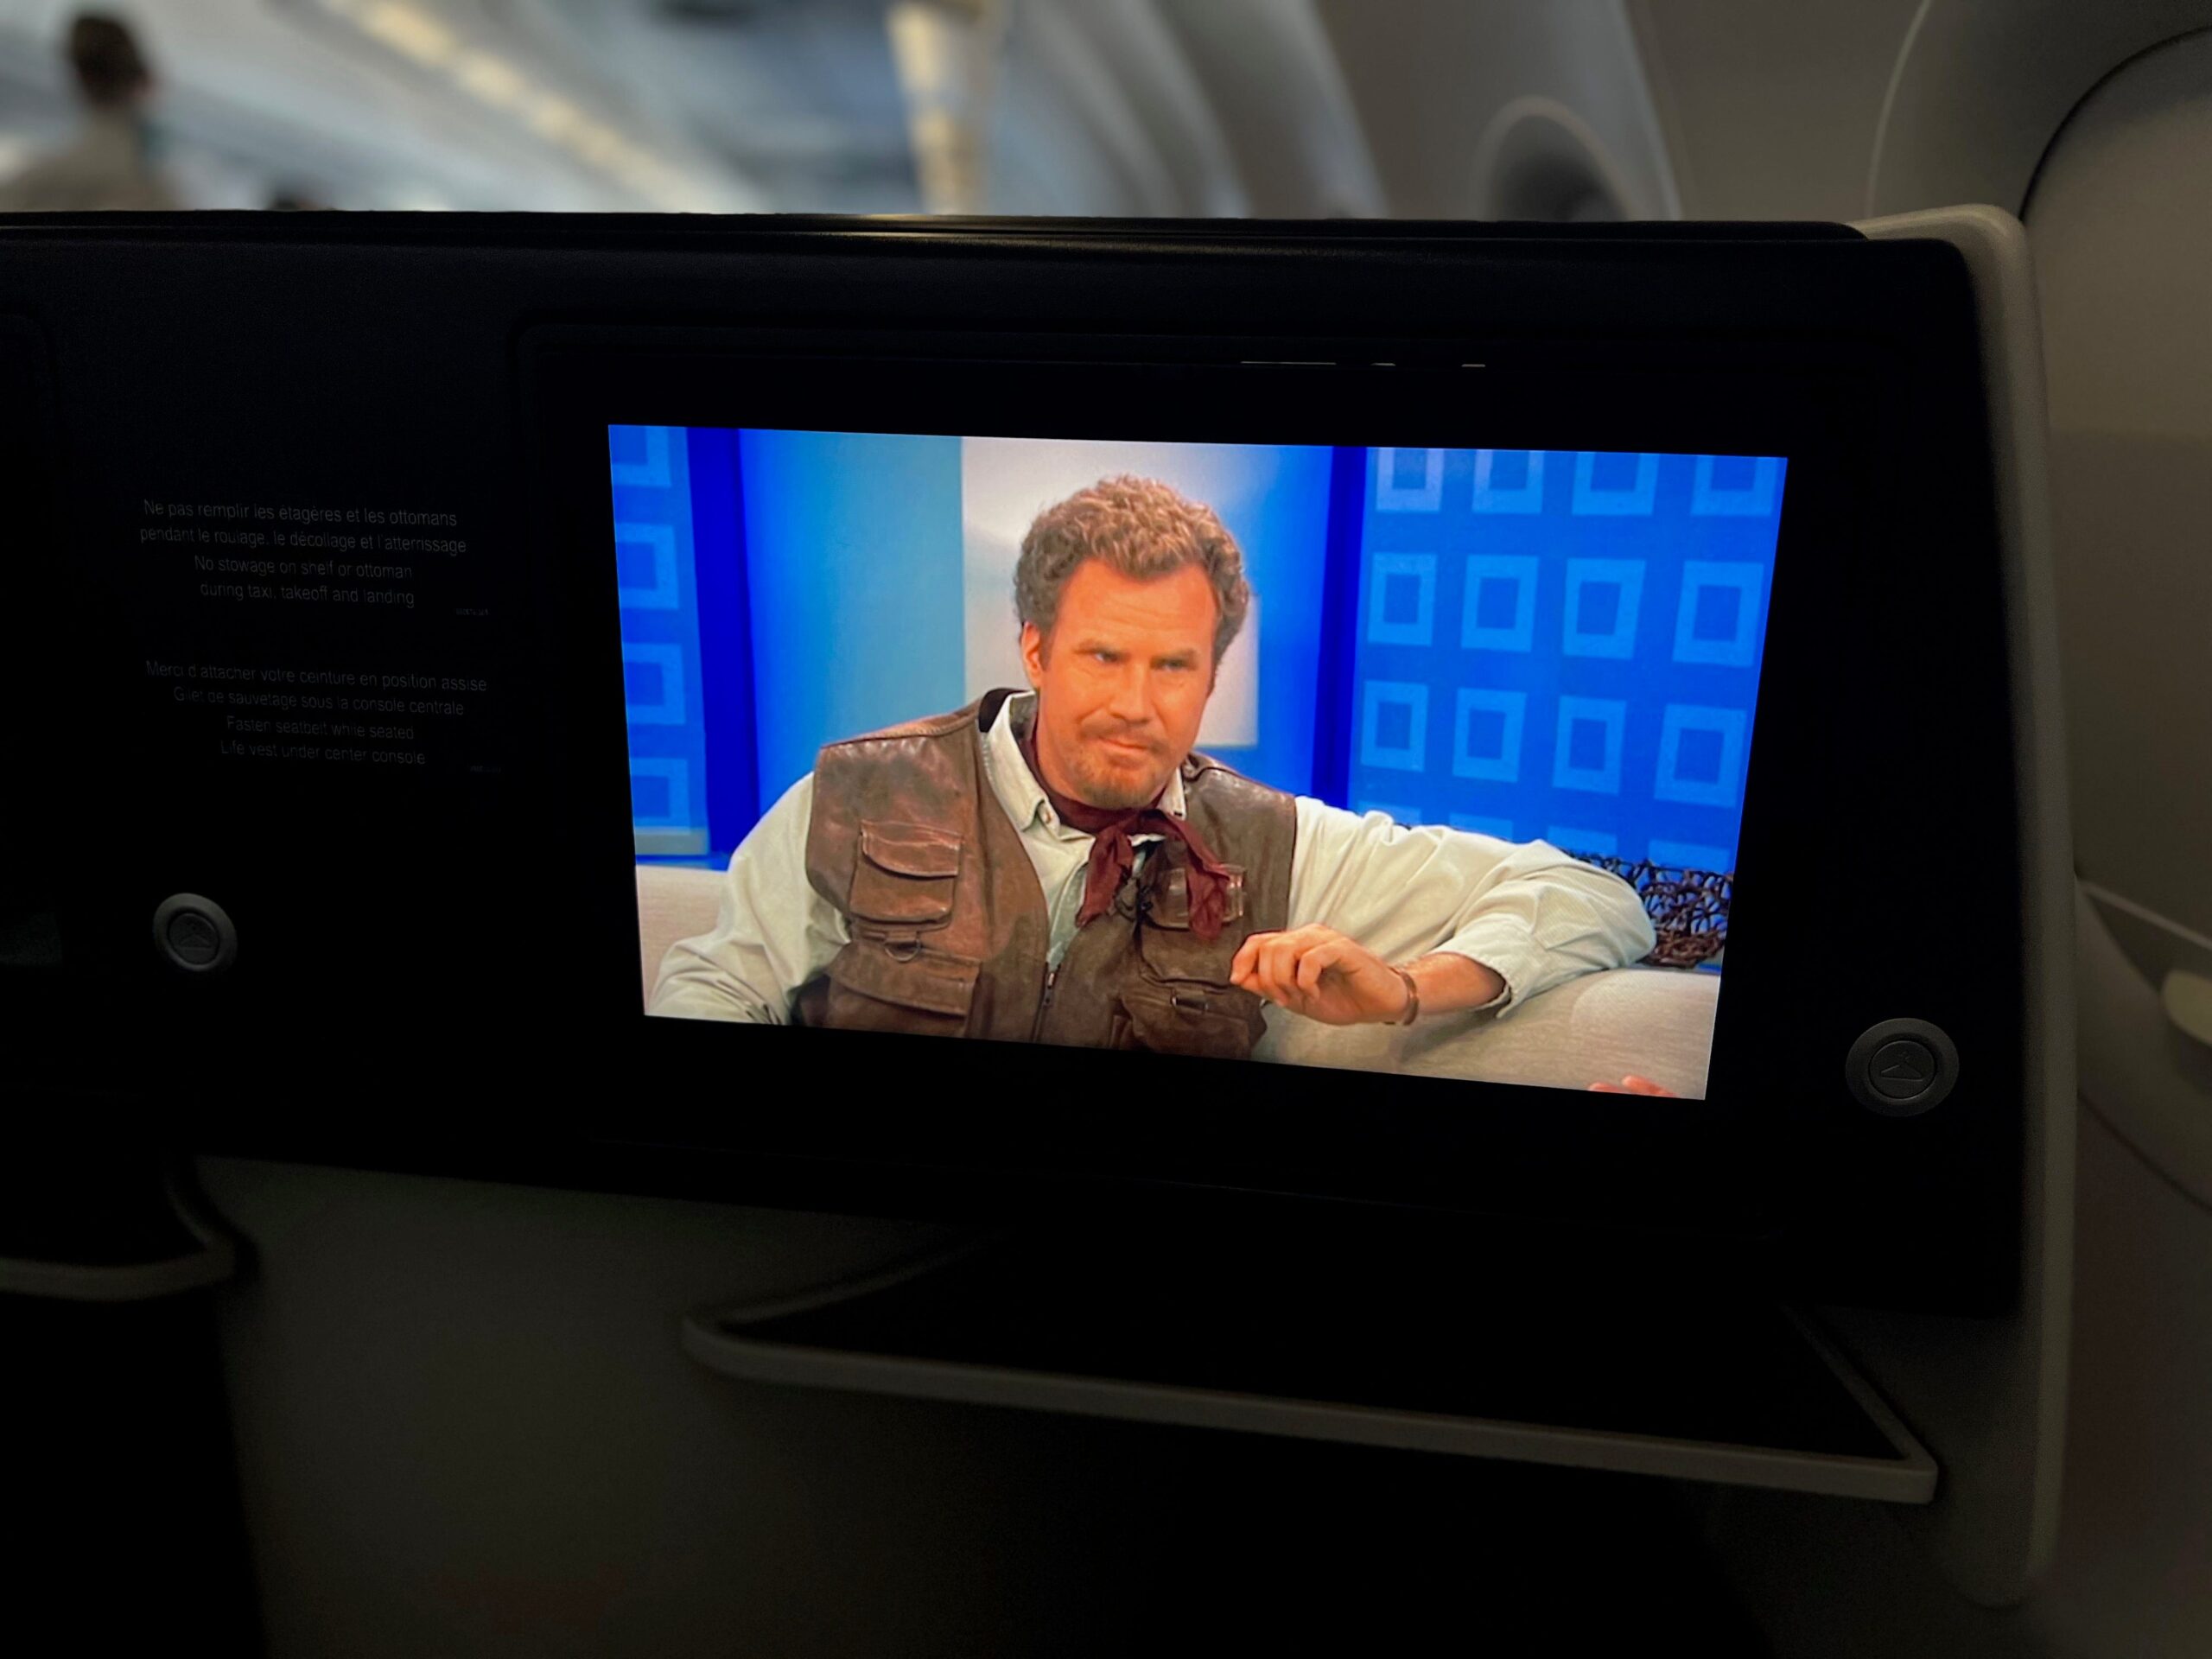 Flying on La Compagnie all-business class airline from Paris to New York &mdash; Land of the Lost playing.